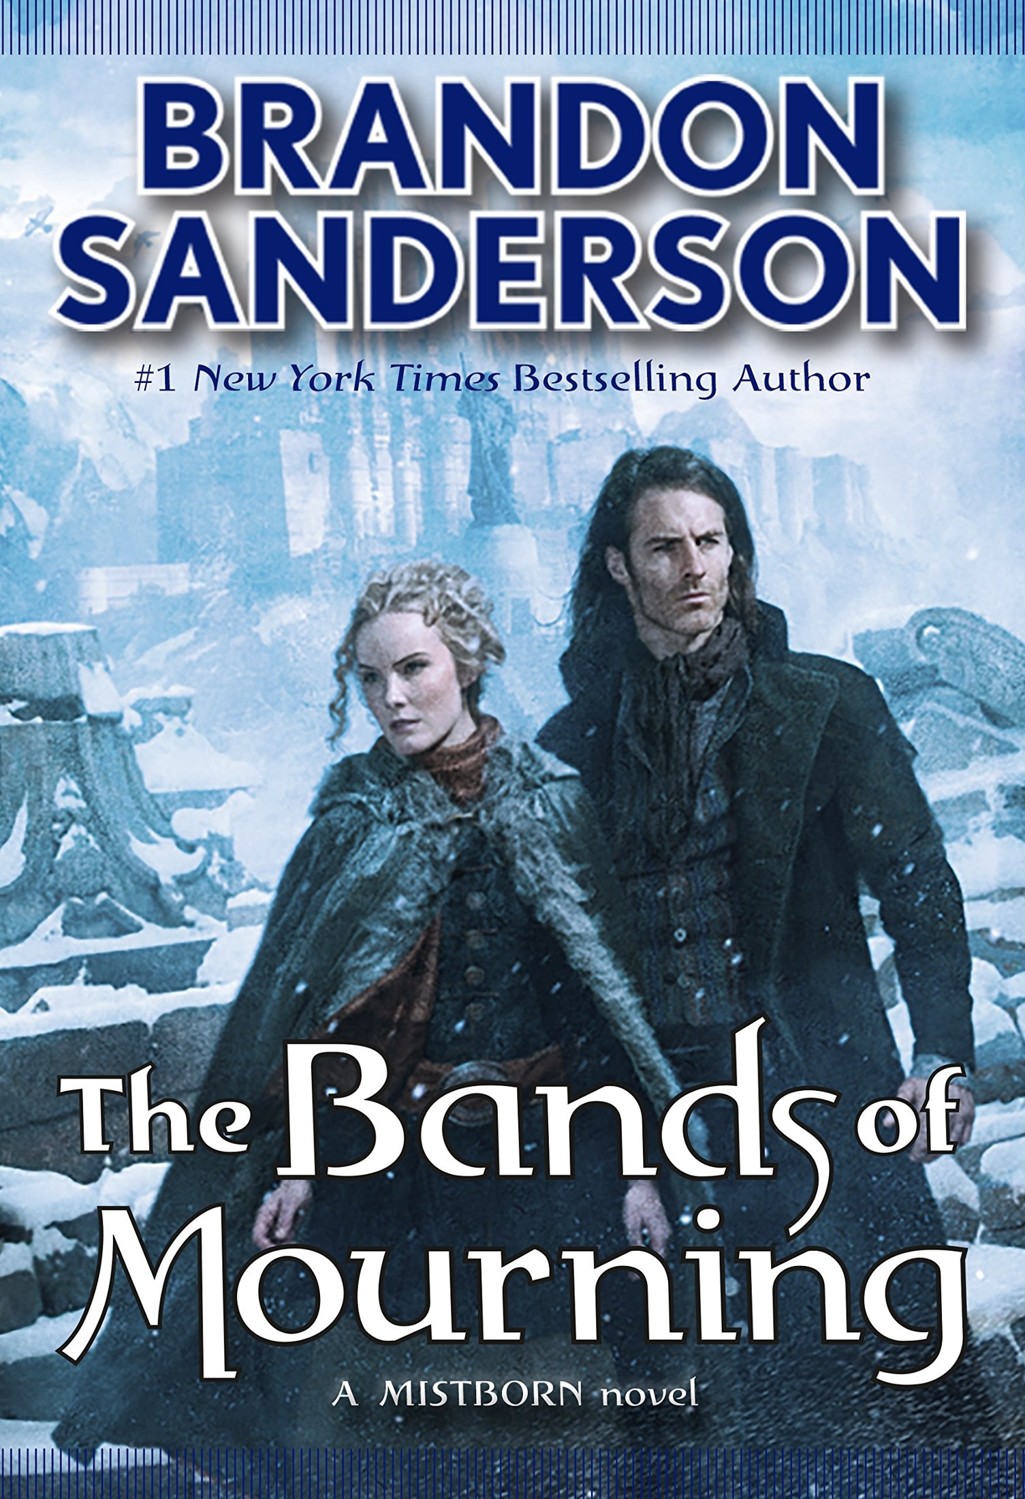 Sanderson, Brandon - Mistborn 06 - The Bands of Mourning